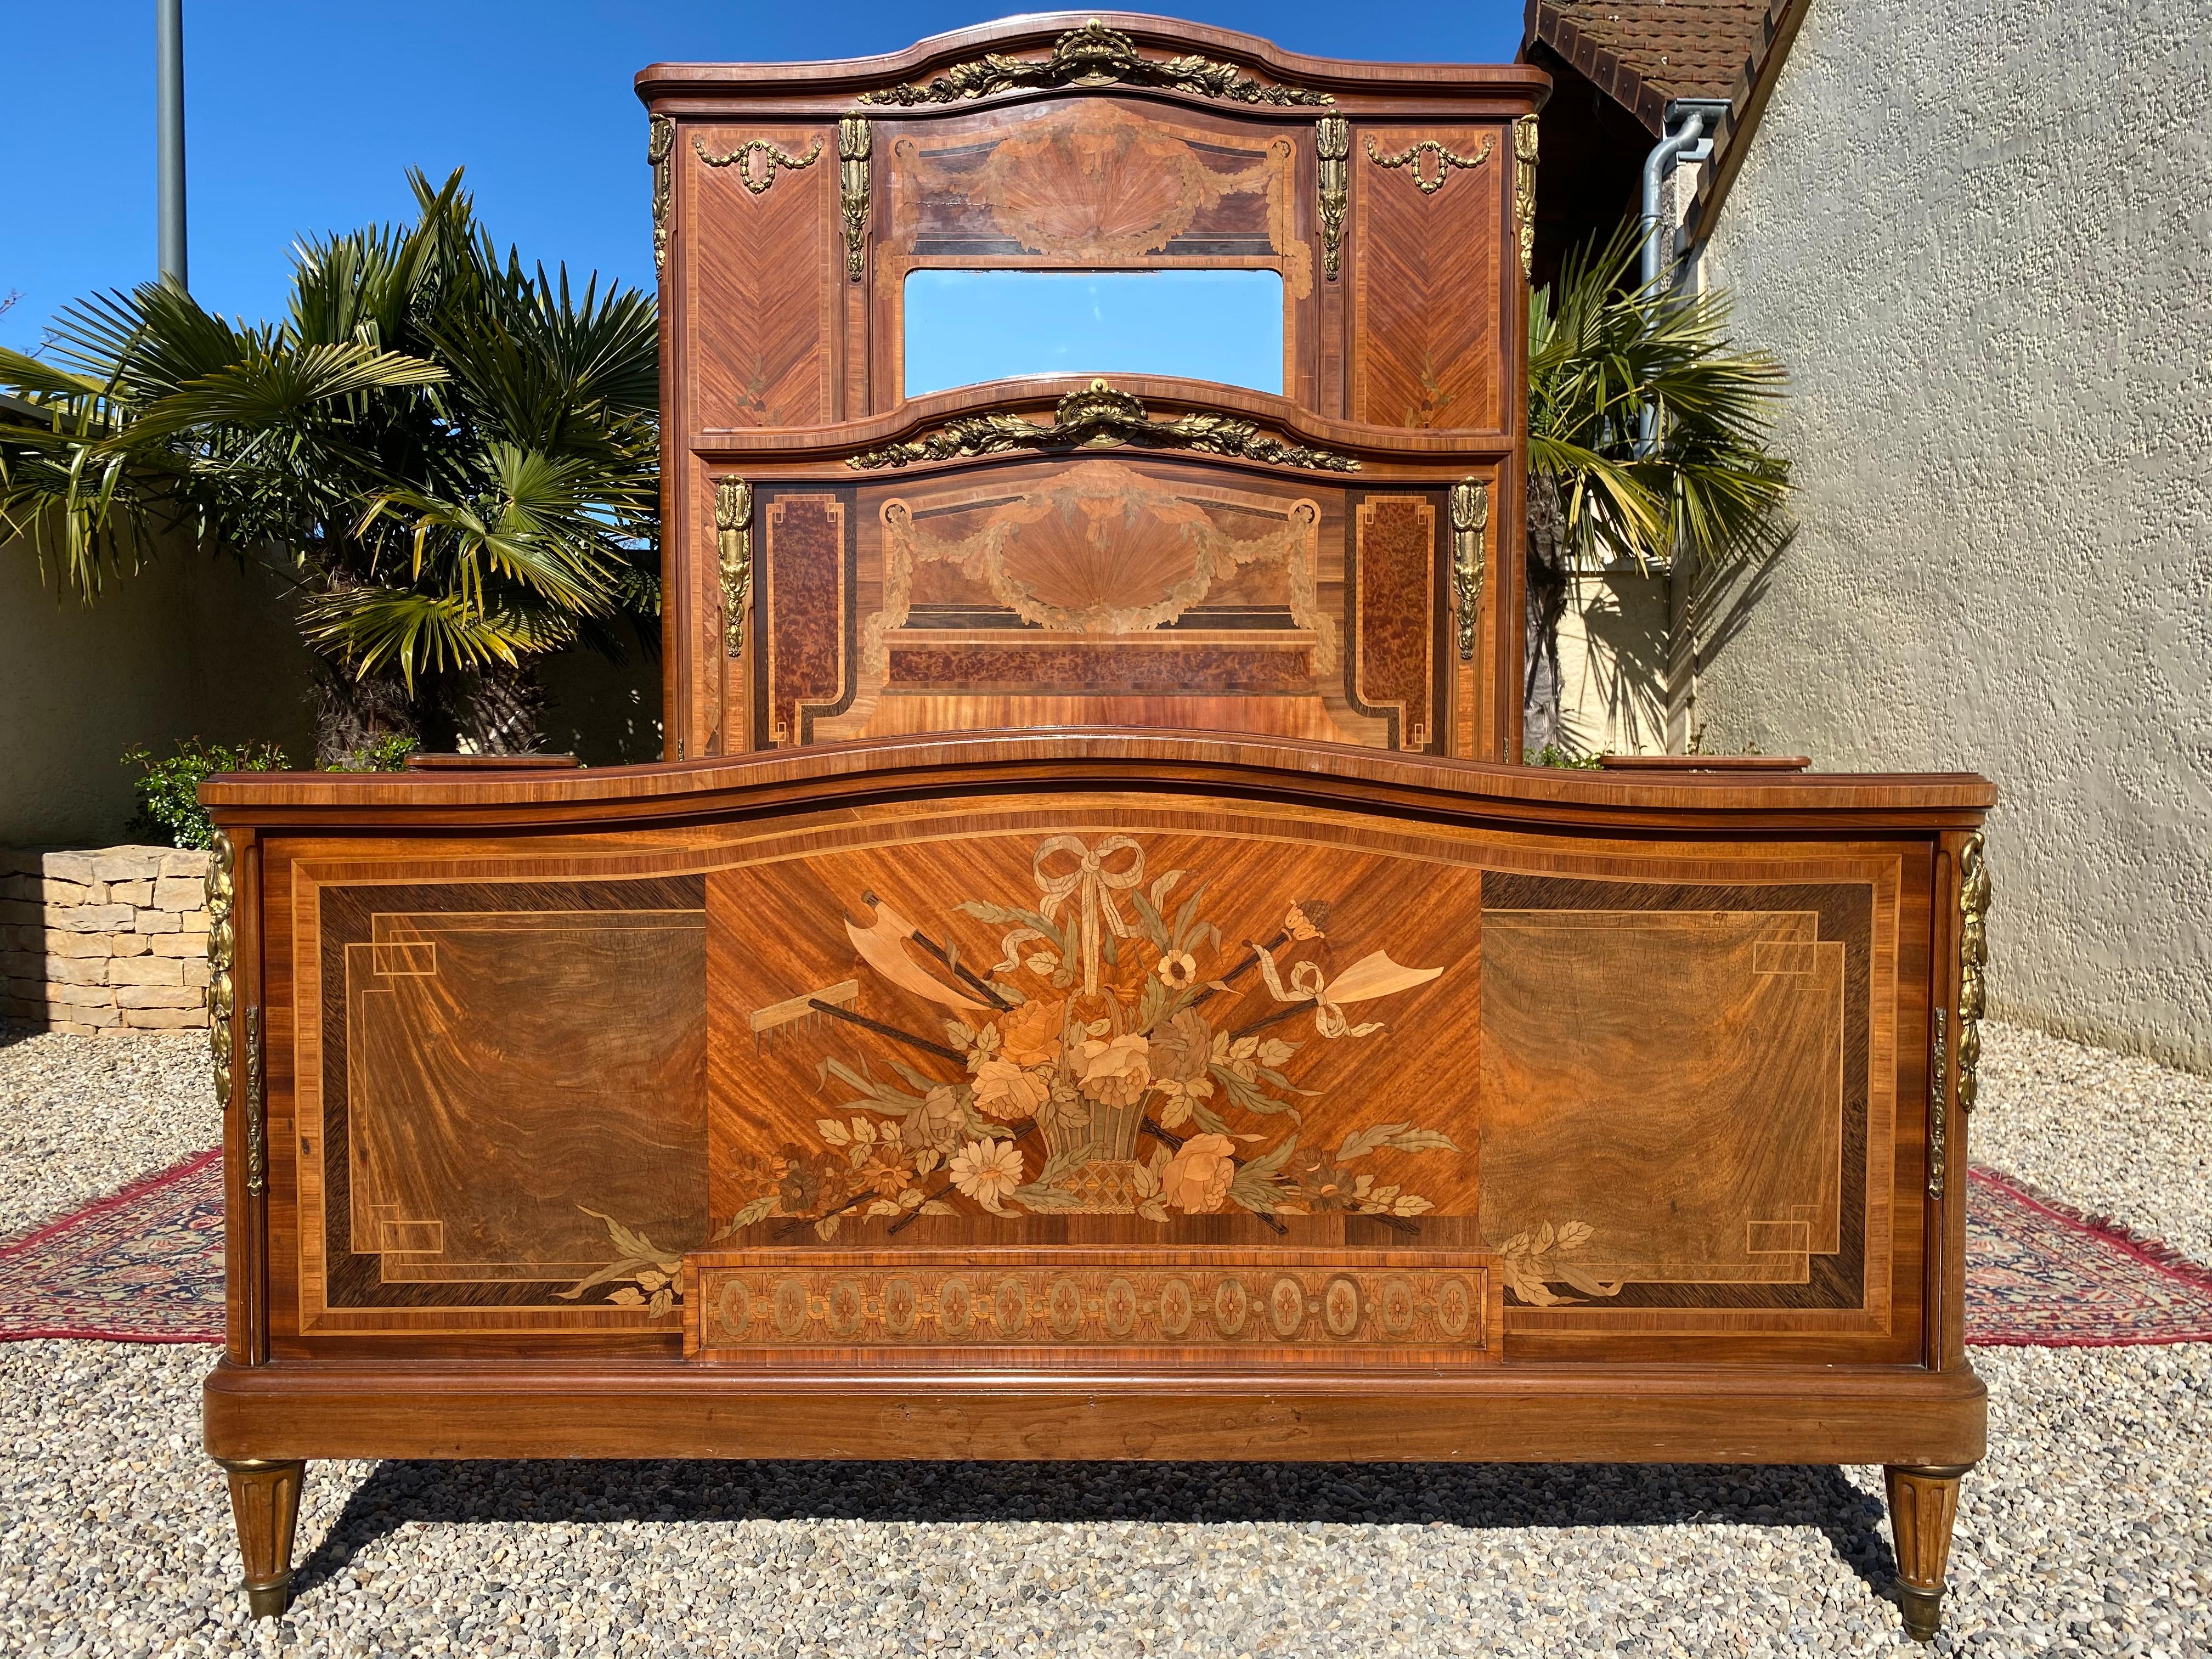 Sumptuous bedroom set of very high quality. This bedroom is composed of a bed, a wardrobe, a mirror and two bedside tables. The whole is in marquetry composed of different woods and the whole is decorated with chiseled gilded bronzes.
The bed is